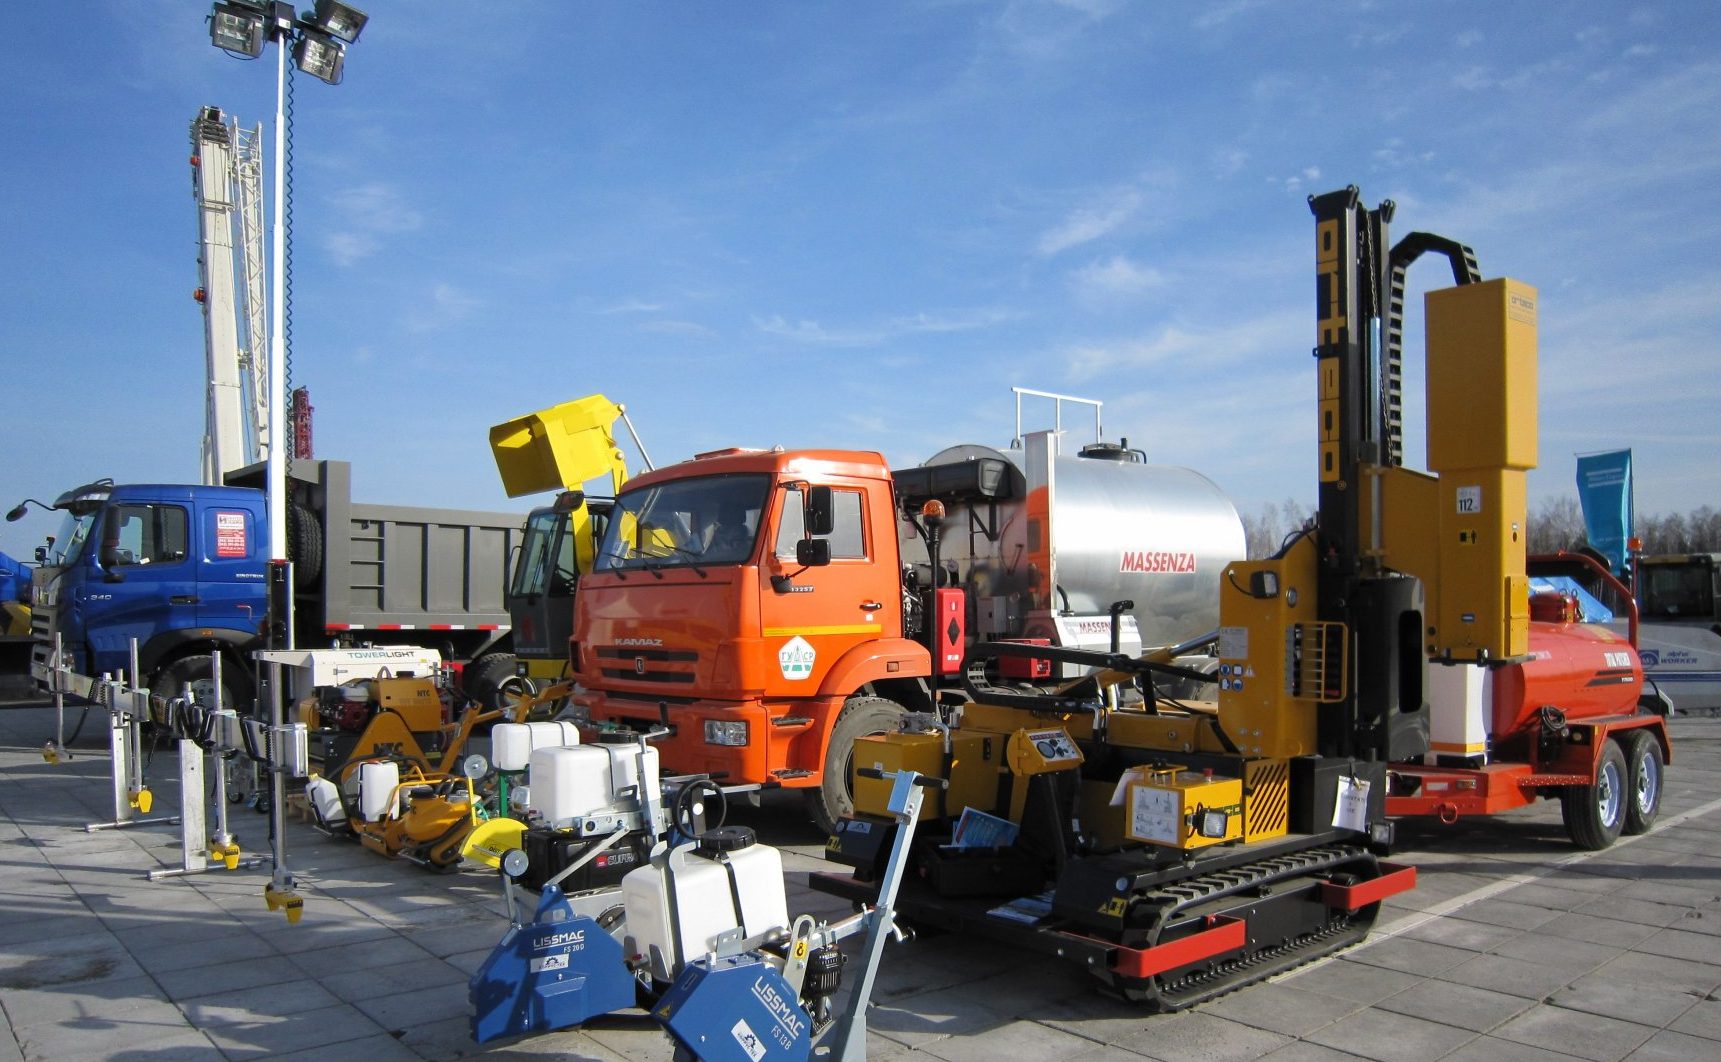 Sale of equipment for construction and repair work in Israel